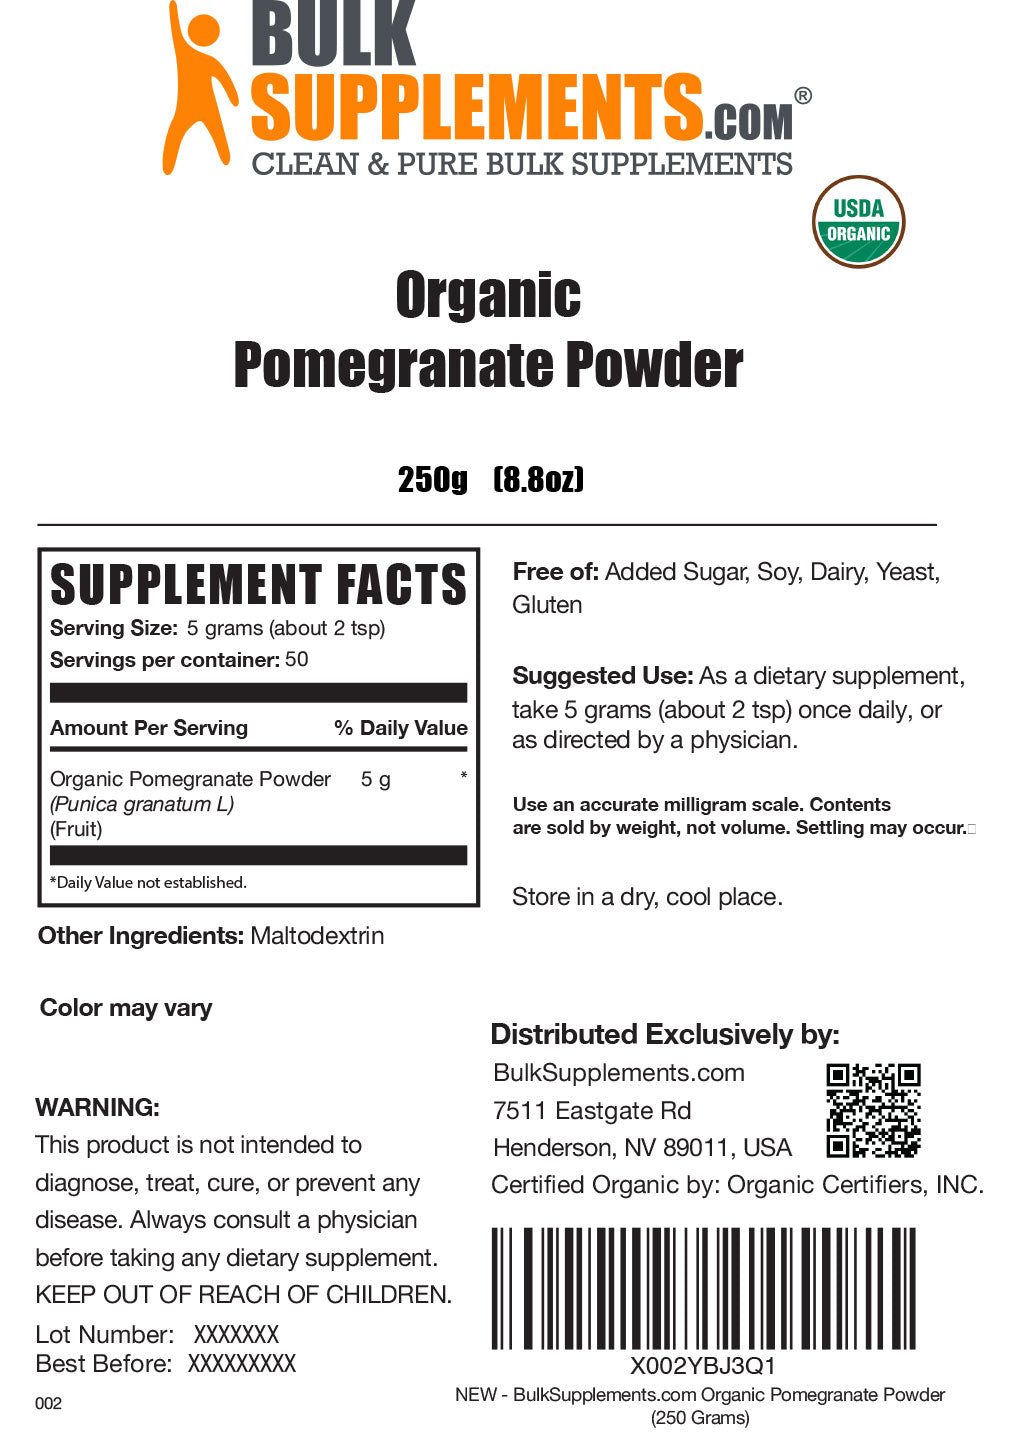 Supplement Facts for Organic Pomegranate Powder